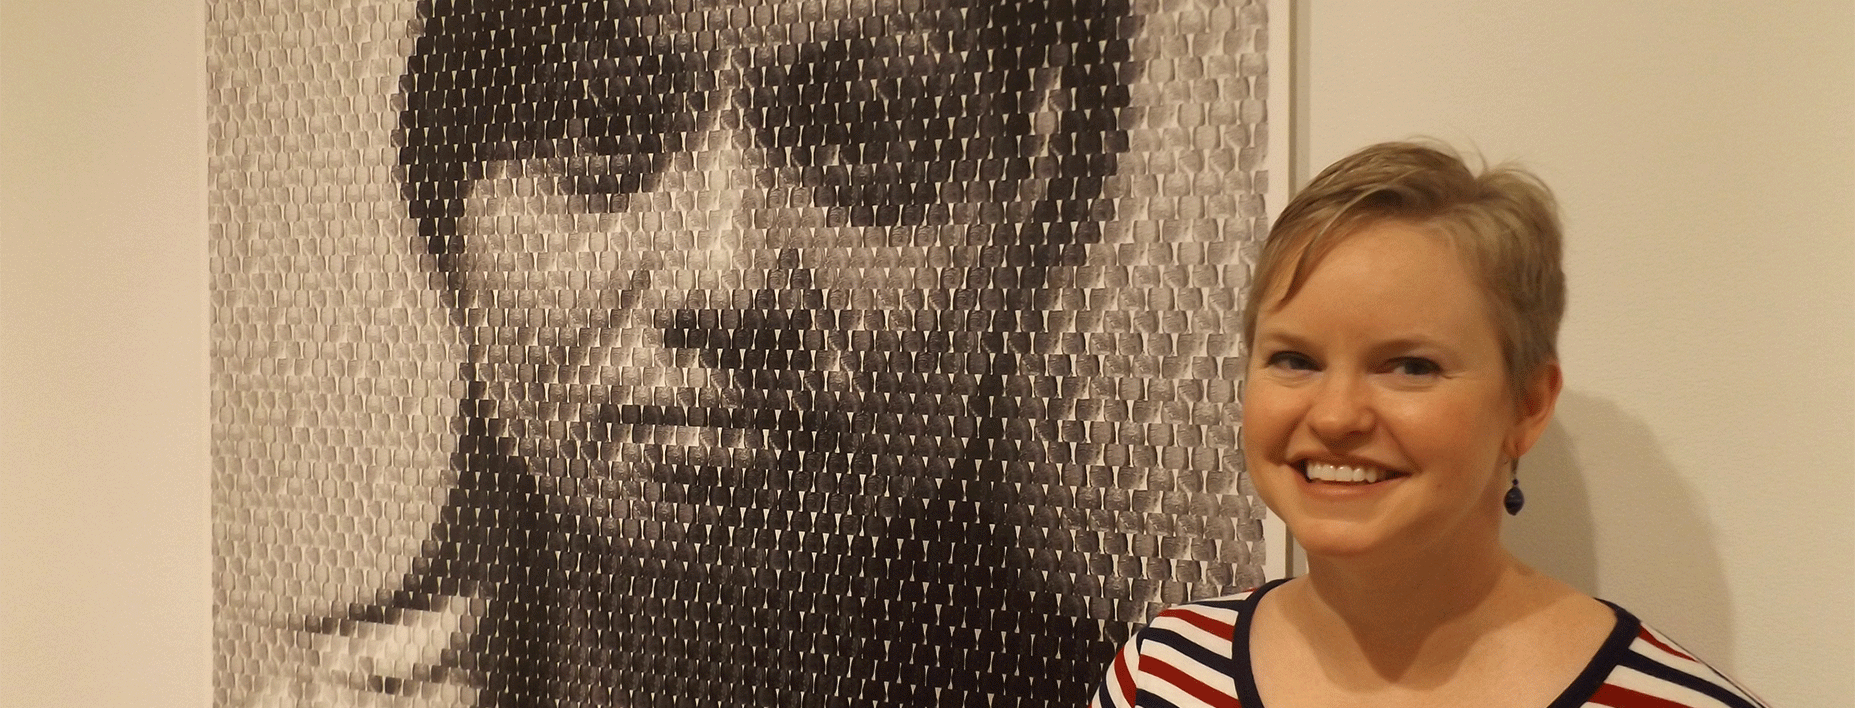 Hand Art Center director Tonya Curran poses beside “Mei,” one of the digital portraits in the exhibit “Anni Holm: The Immigration Project.”